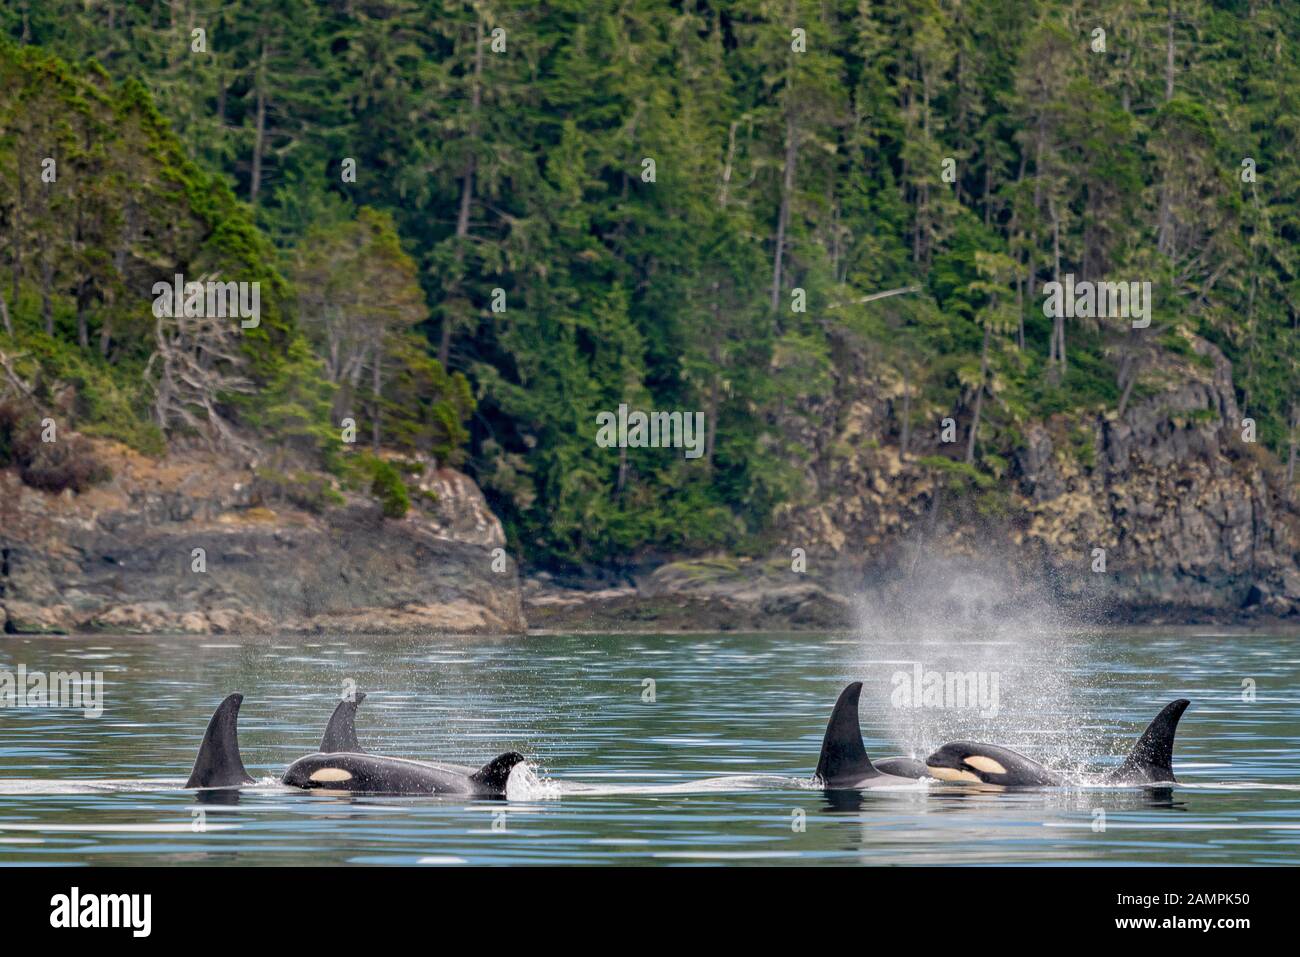 A54, A106, A118, A86, A75, orcinus Orca, Johnstone Strait, First Nations Territory, British Columbia, Canada. Foto Stock